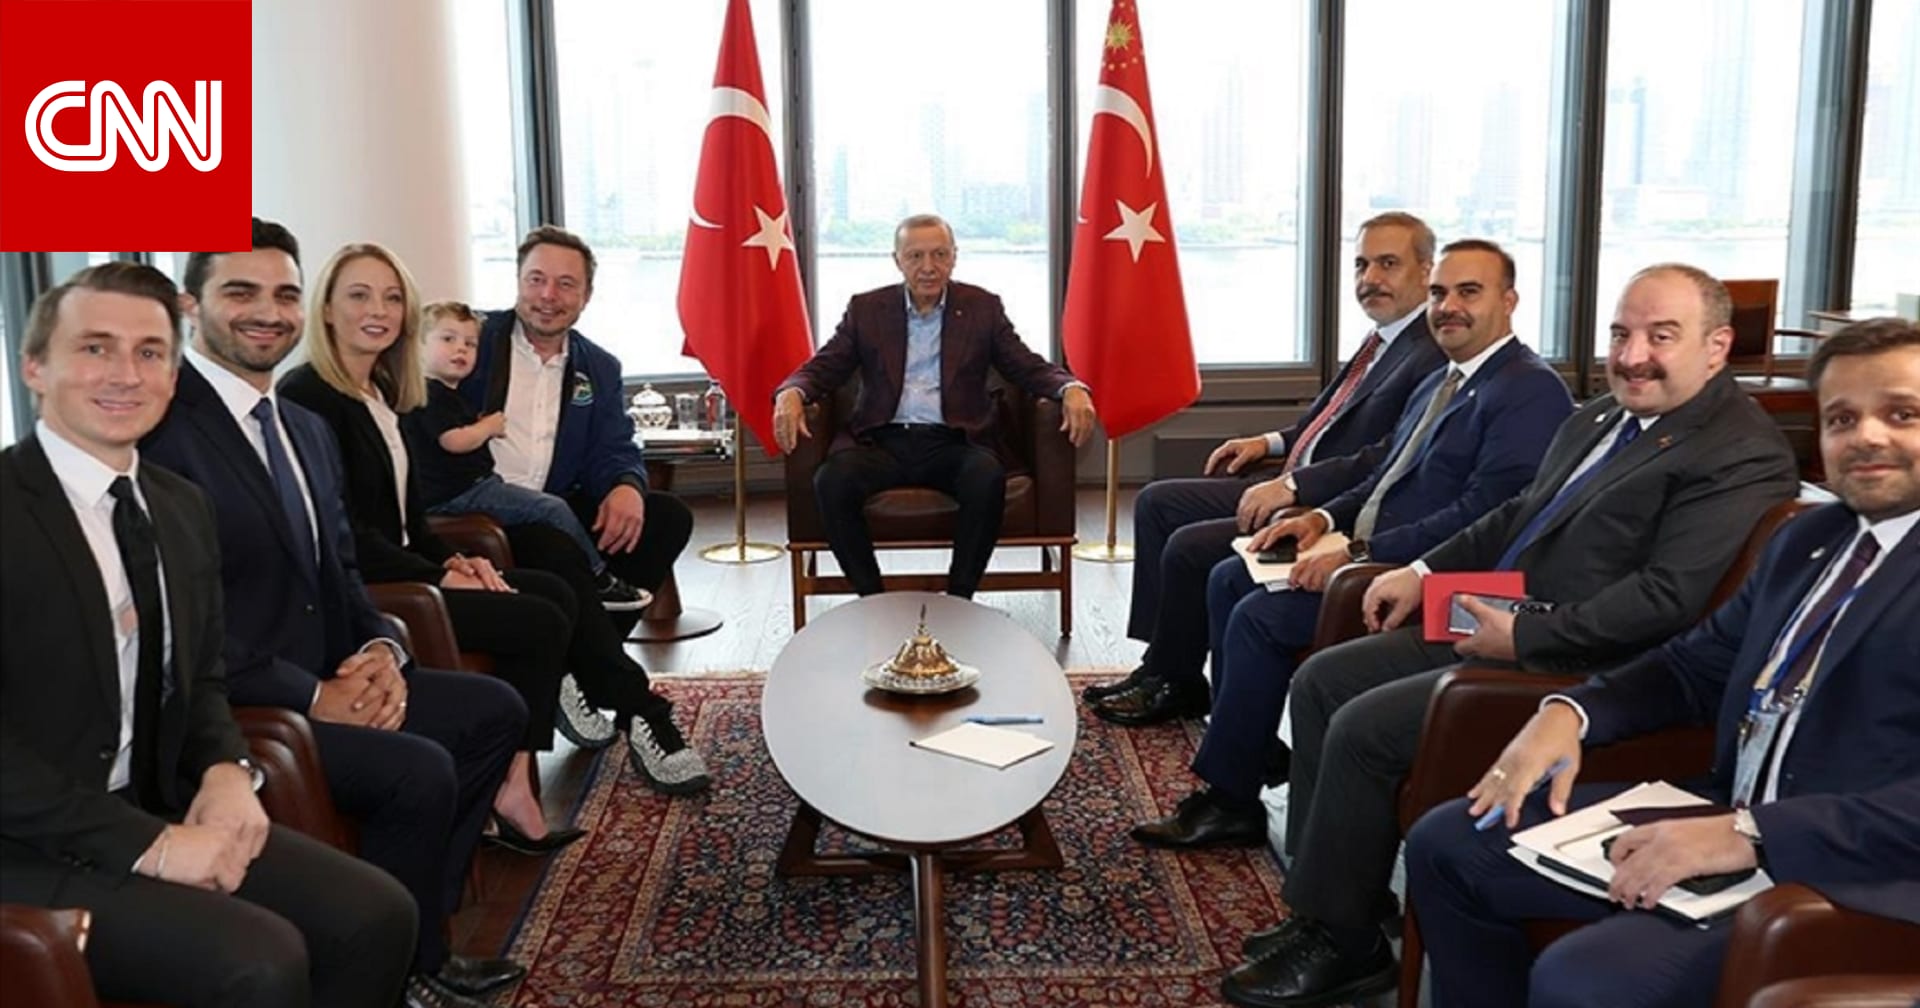 Turkish President Erdogan Surprises Elon Musk with a Question About His Wife